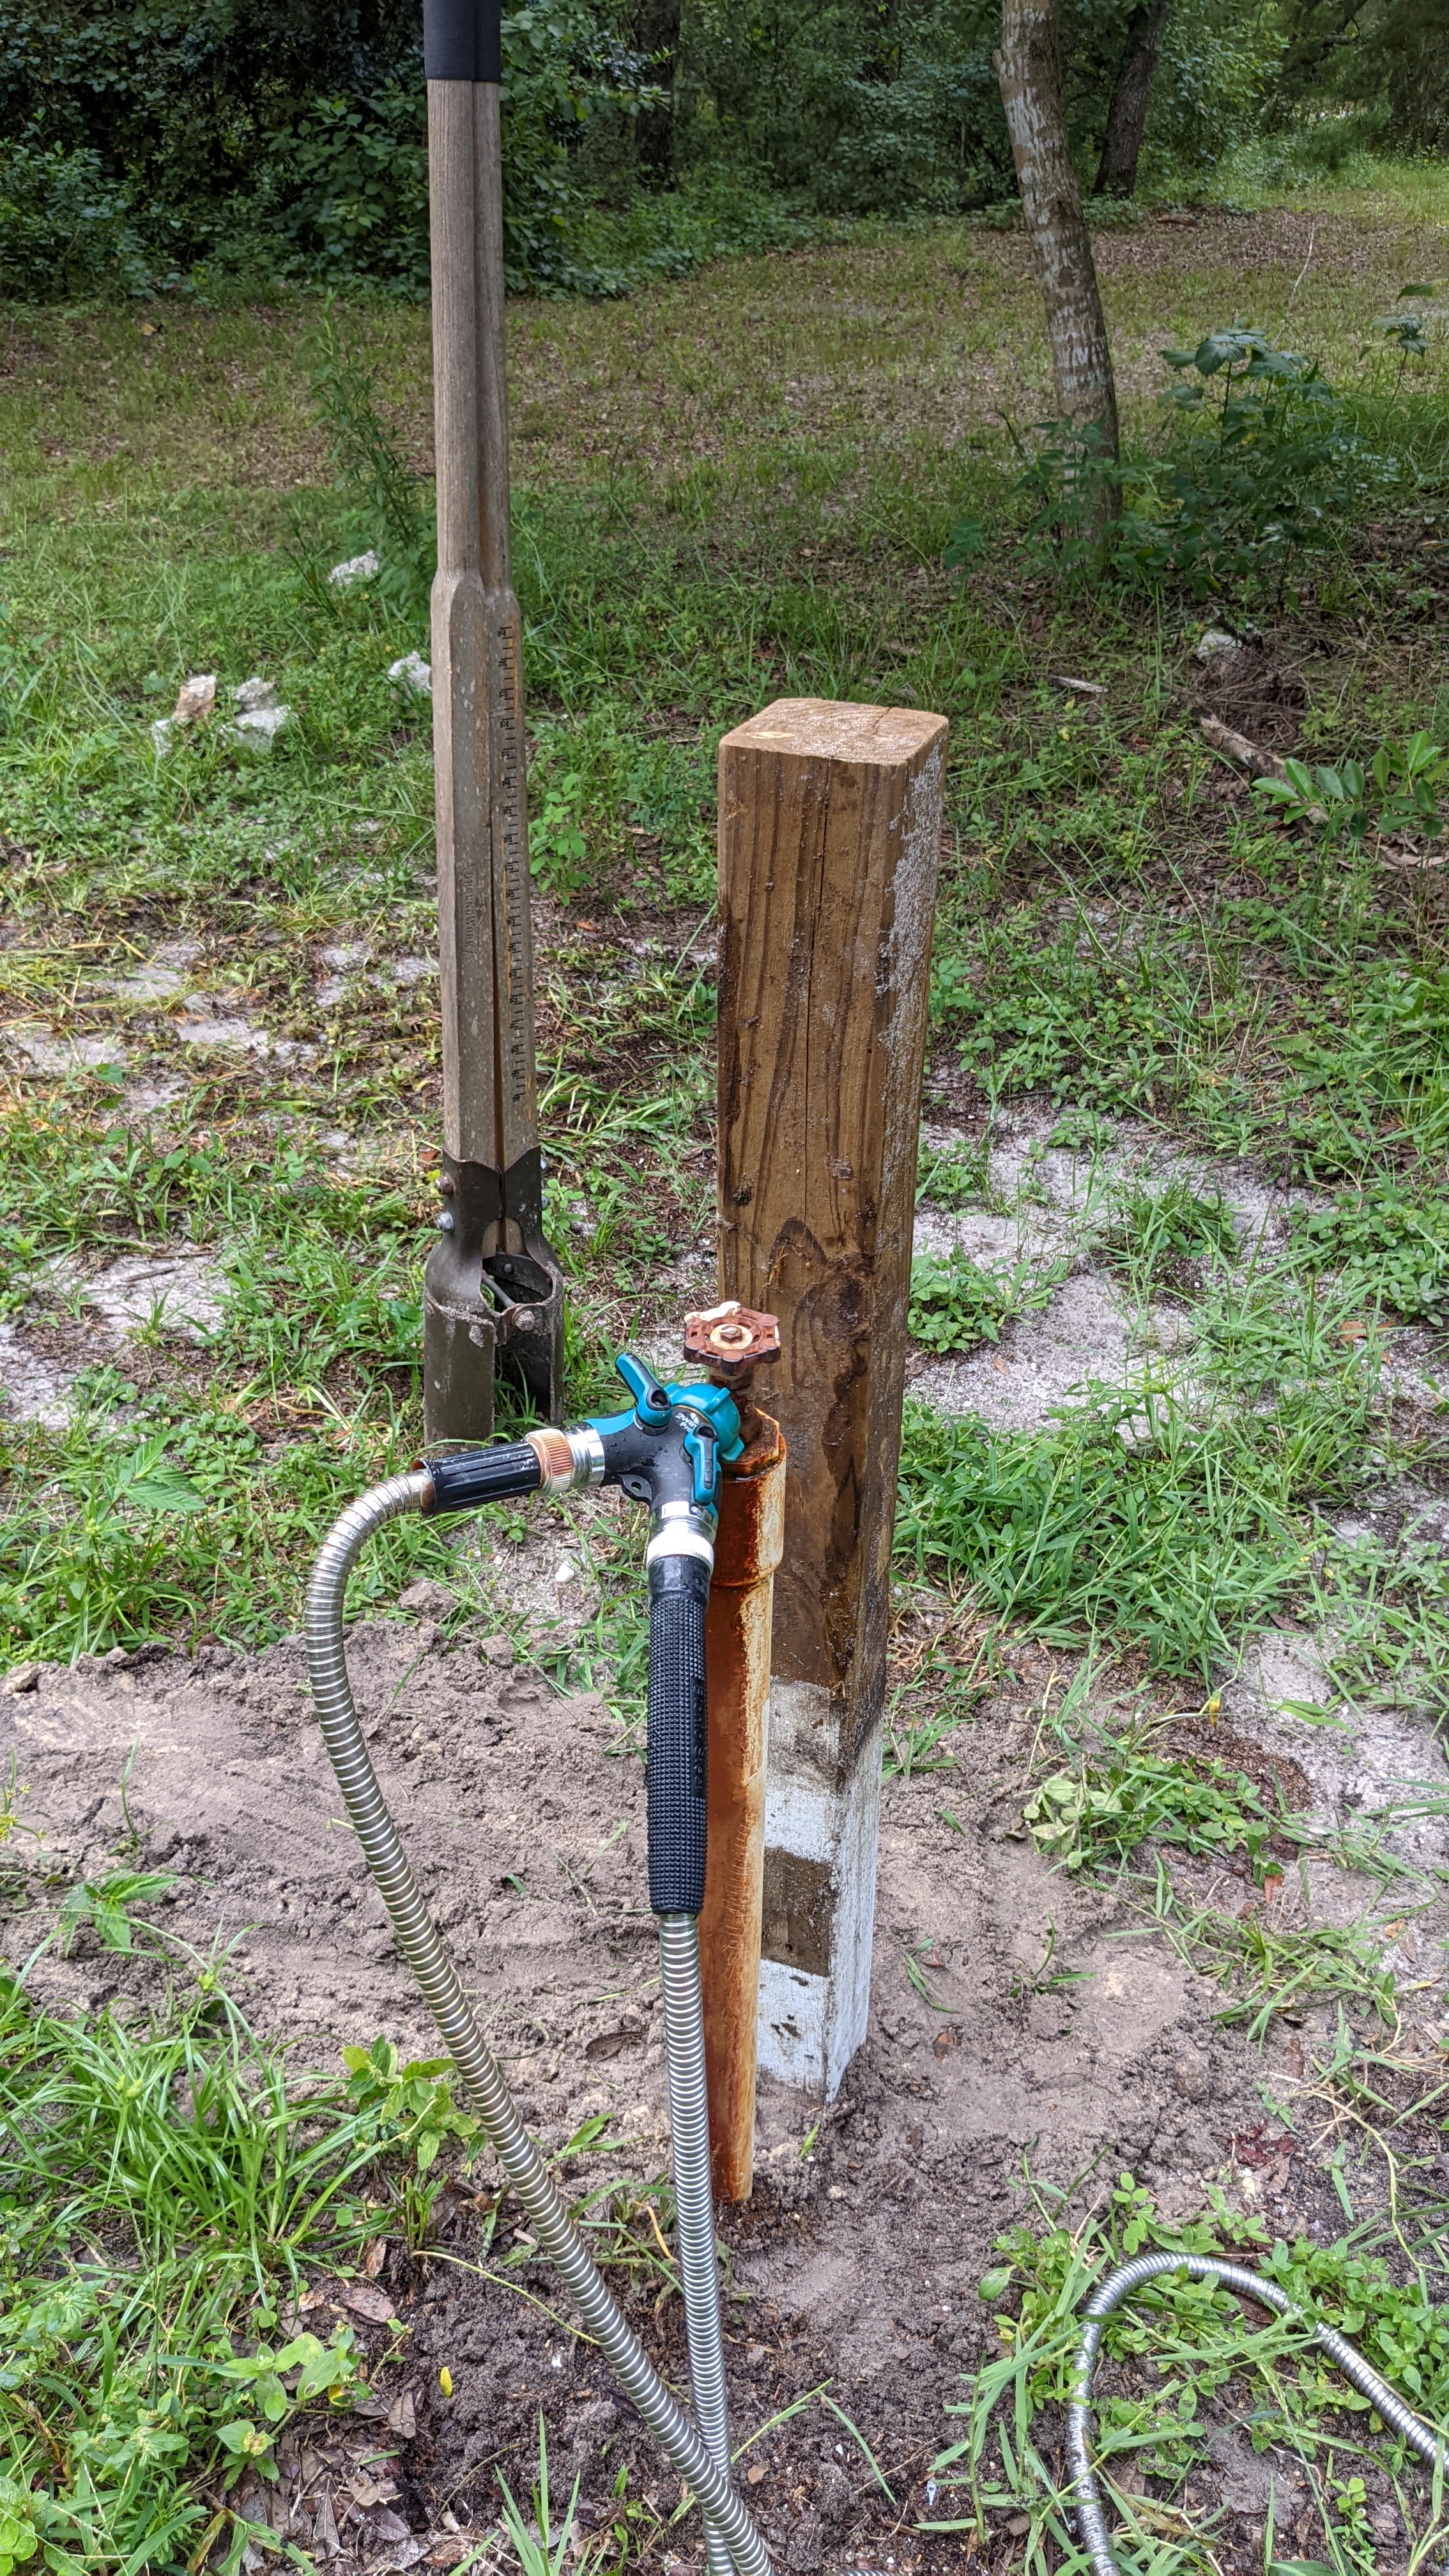 placed the post behind the spigot pipe